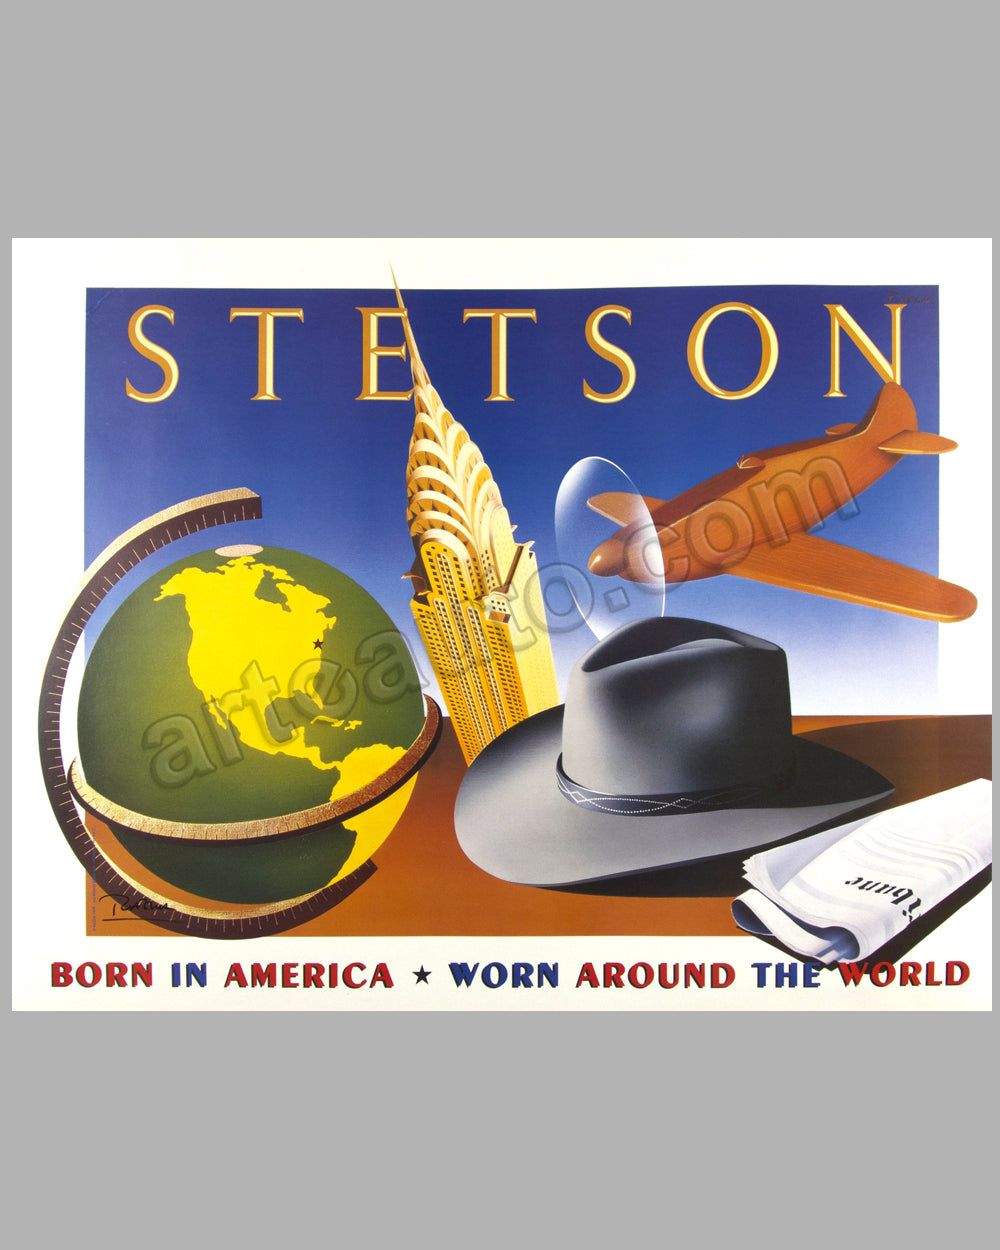 Stetson Hats large original advertising poster by Razzia